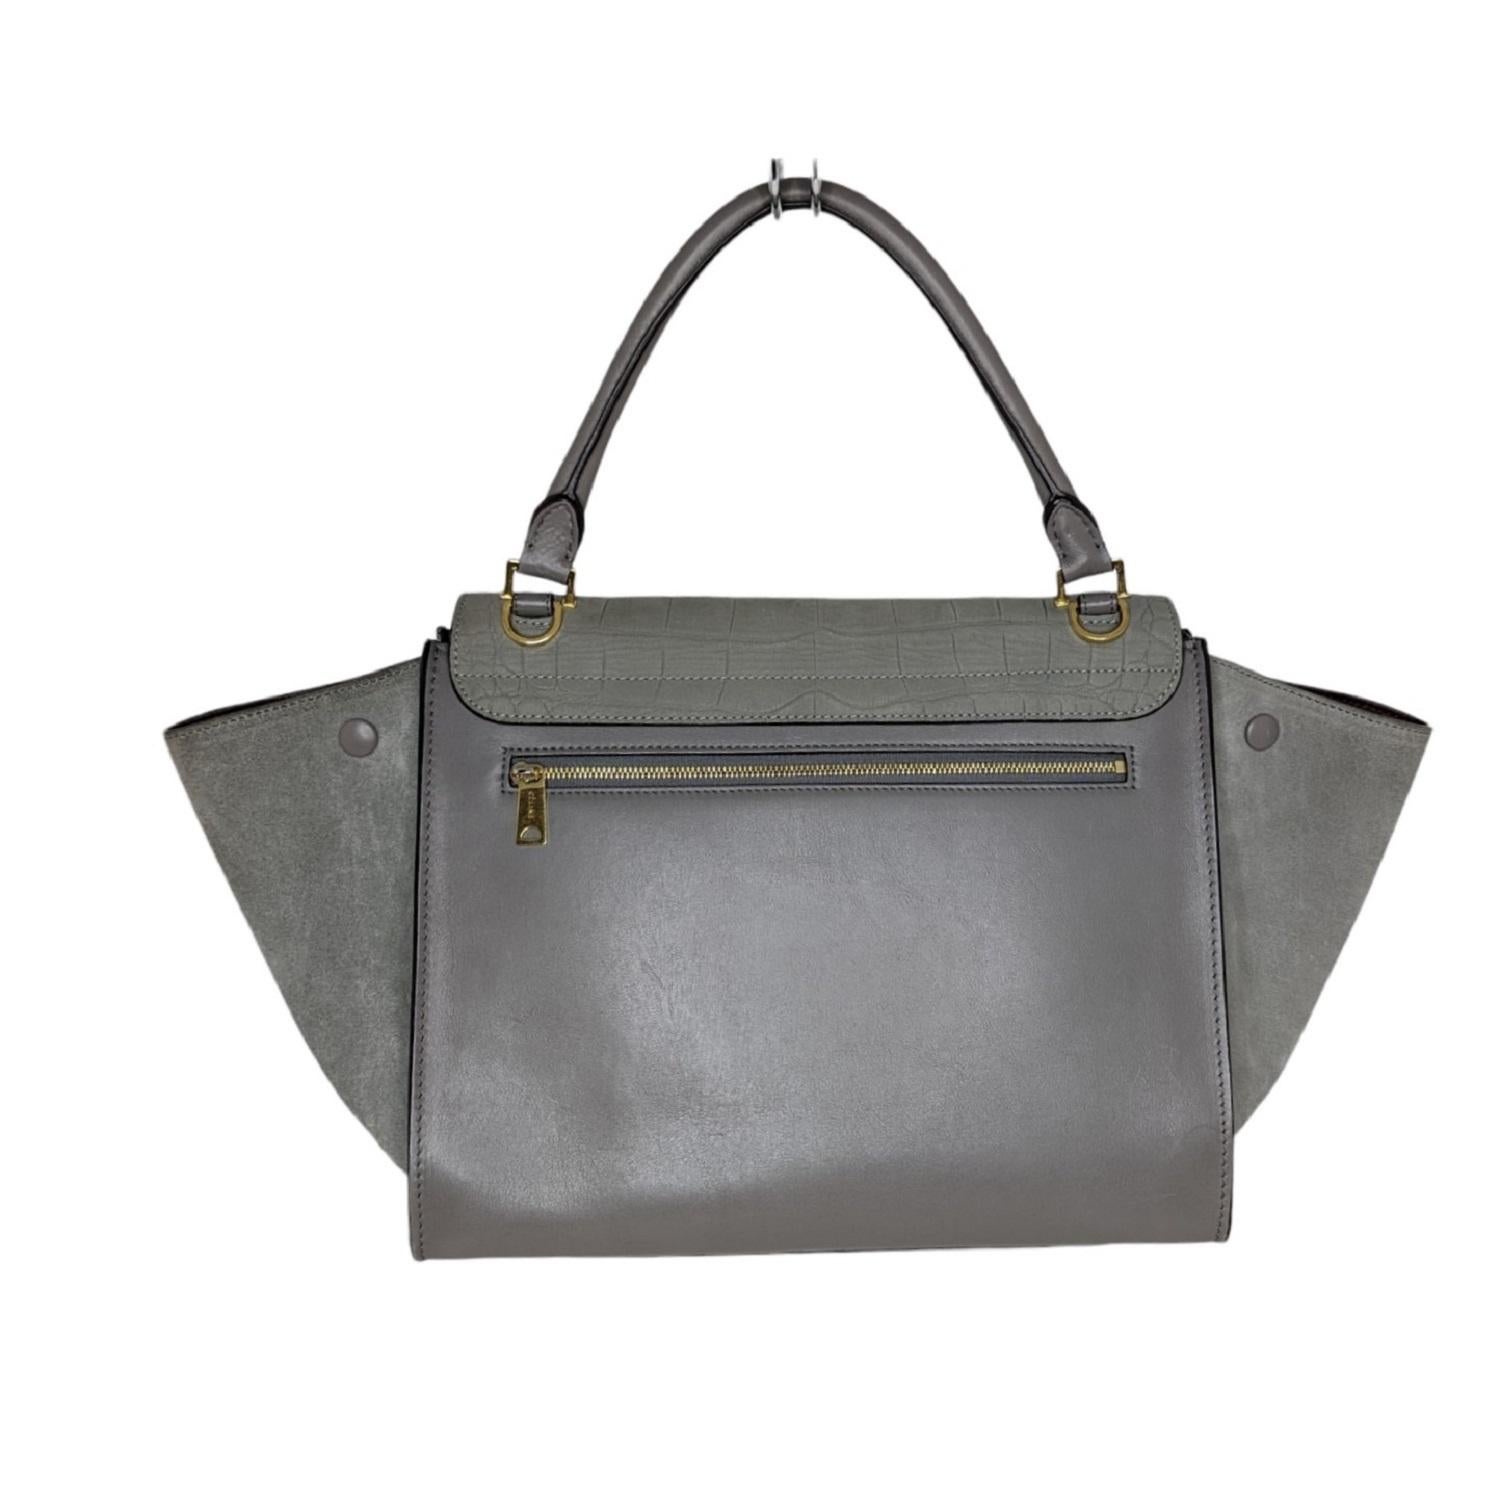 This chic tote is composed of crocodile embossed suede leather, contrasting smooth leather, and brass hardware. This bag features a smooth rolled leather top handle, a smooth leather shoulder strap, expansive suede leather side wings, and a